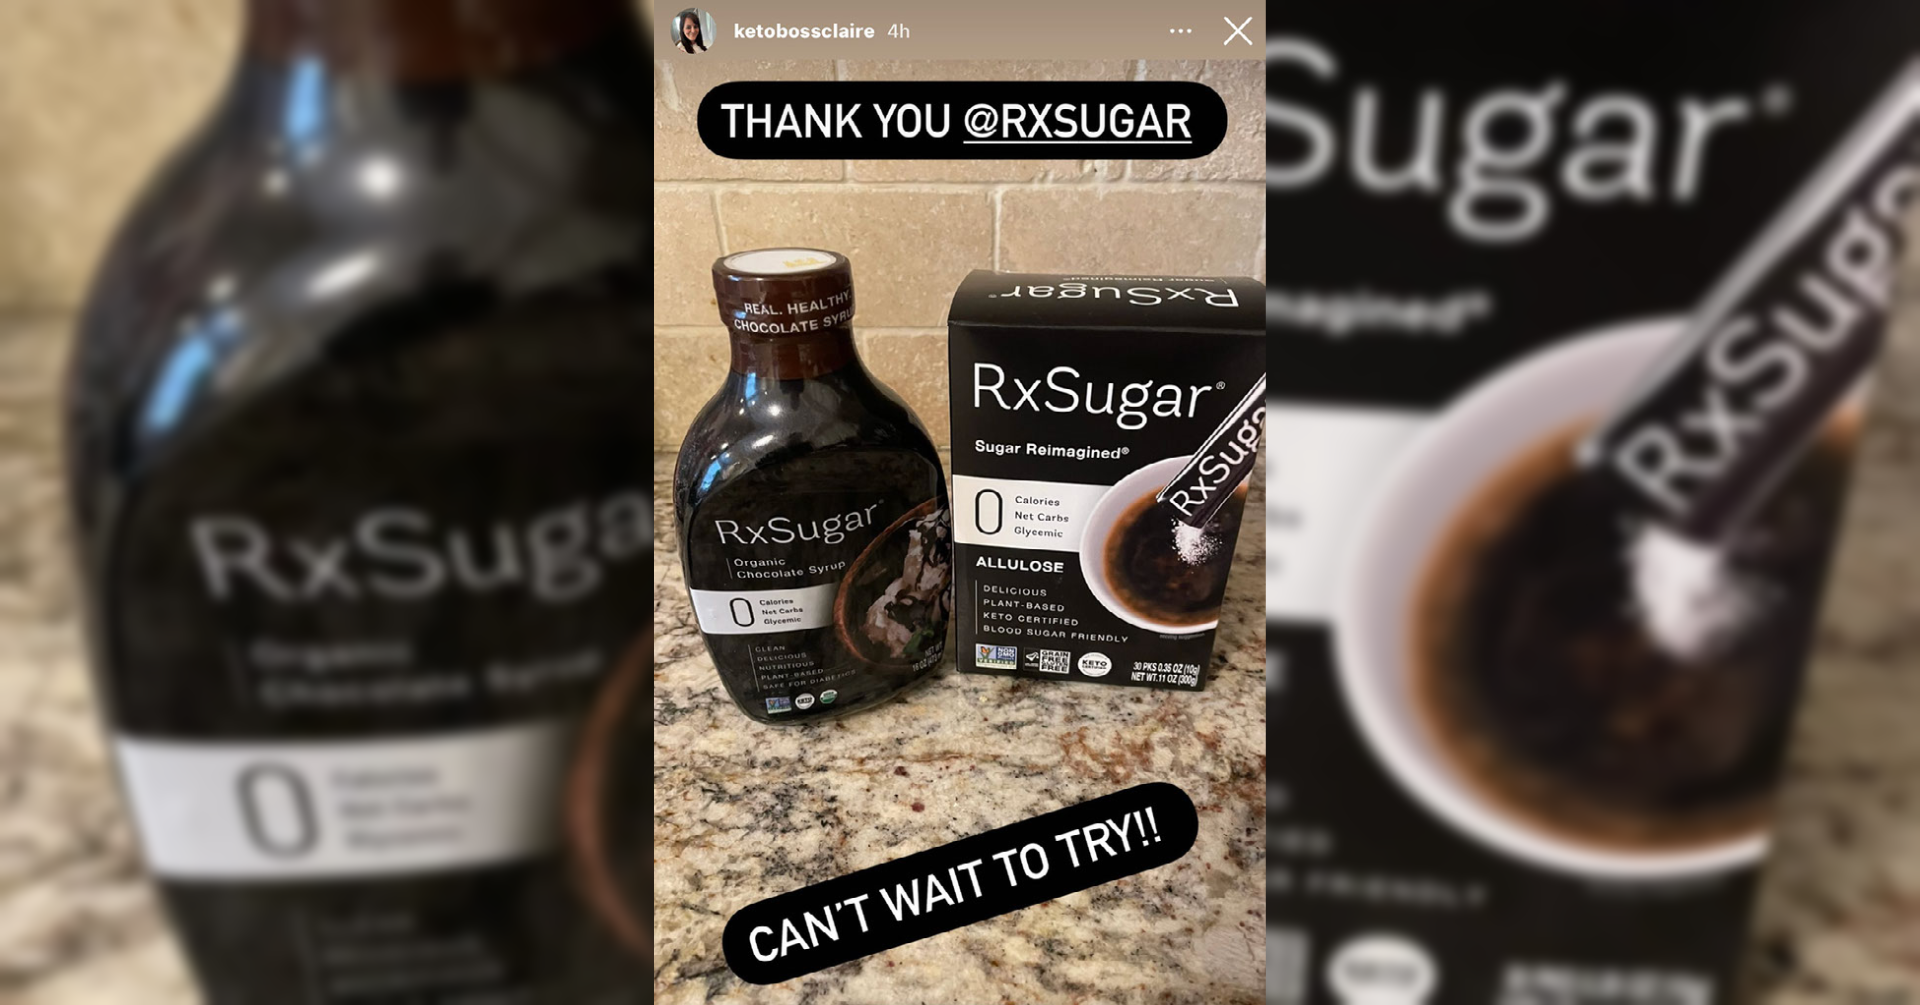 Keto Boss Claire Loving Her New RxSugar Package